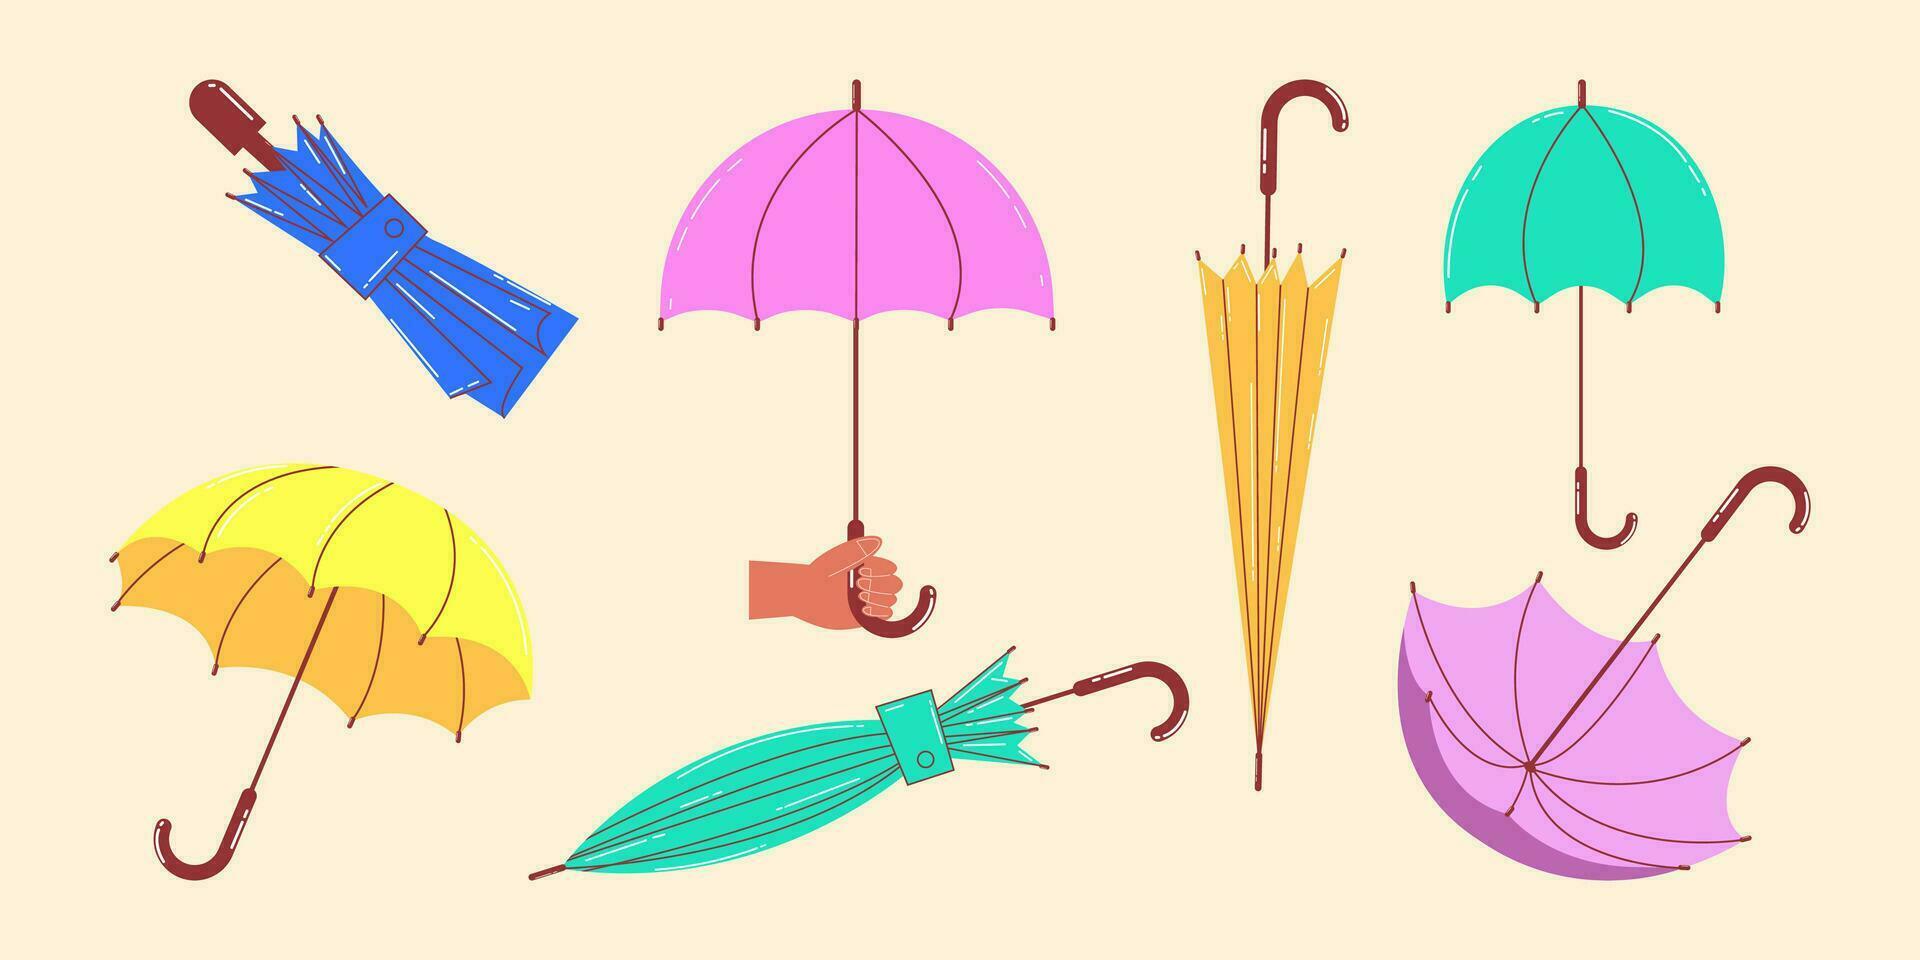 Different Umbrellas in various positions. Open and folded umbrellas. Vector illustration of umbrellas in cartoon style.